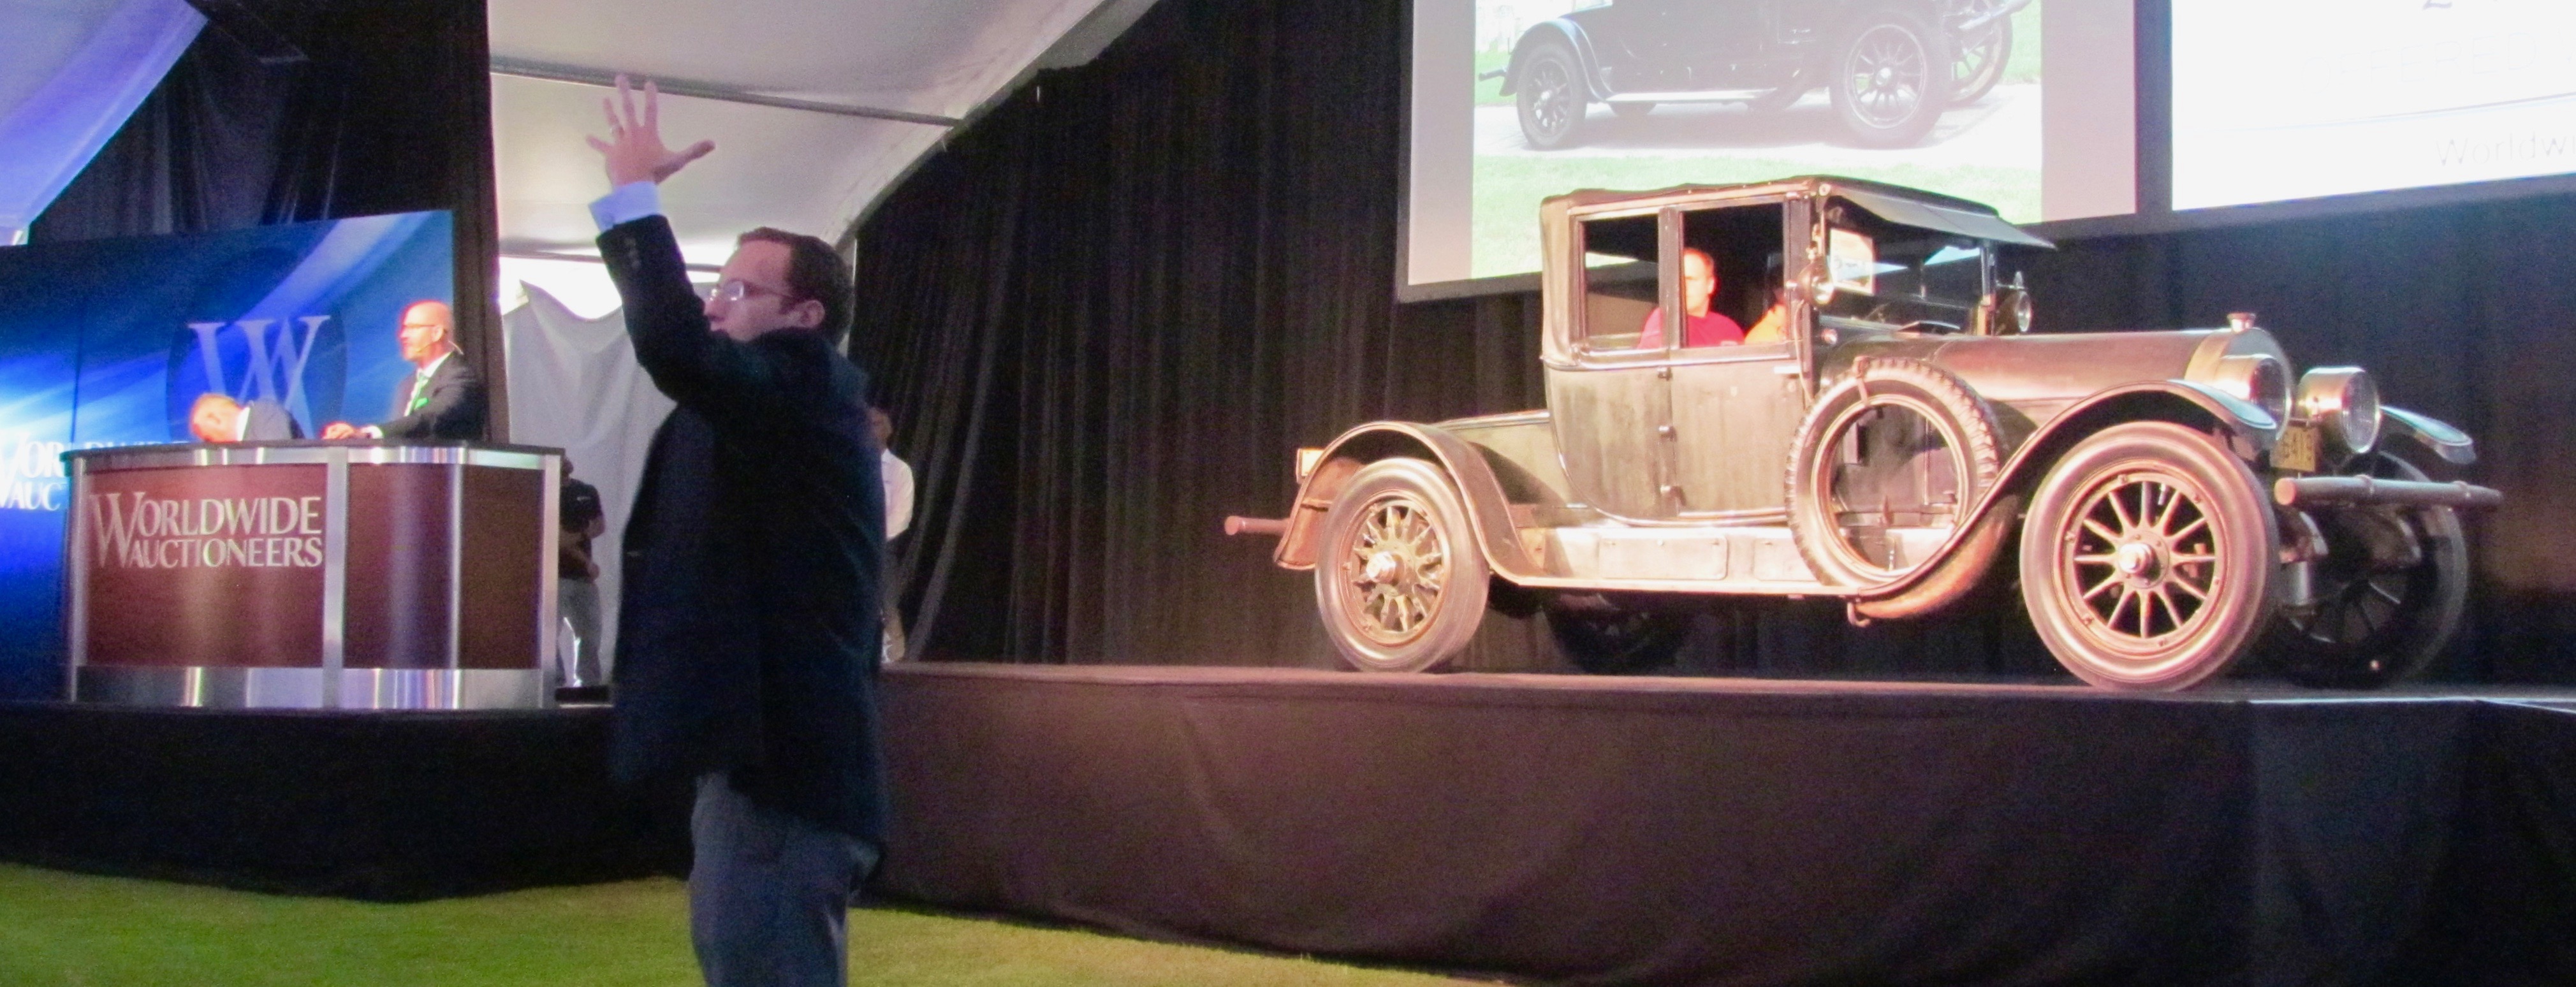 Auctions, Slow start for auctions on Monterey Peninsula, ClassicCars.com Journal